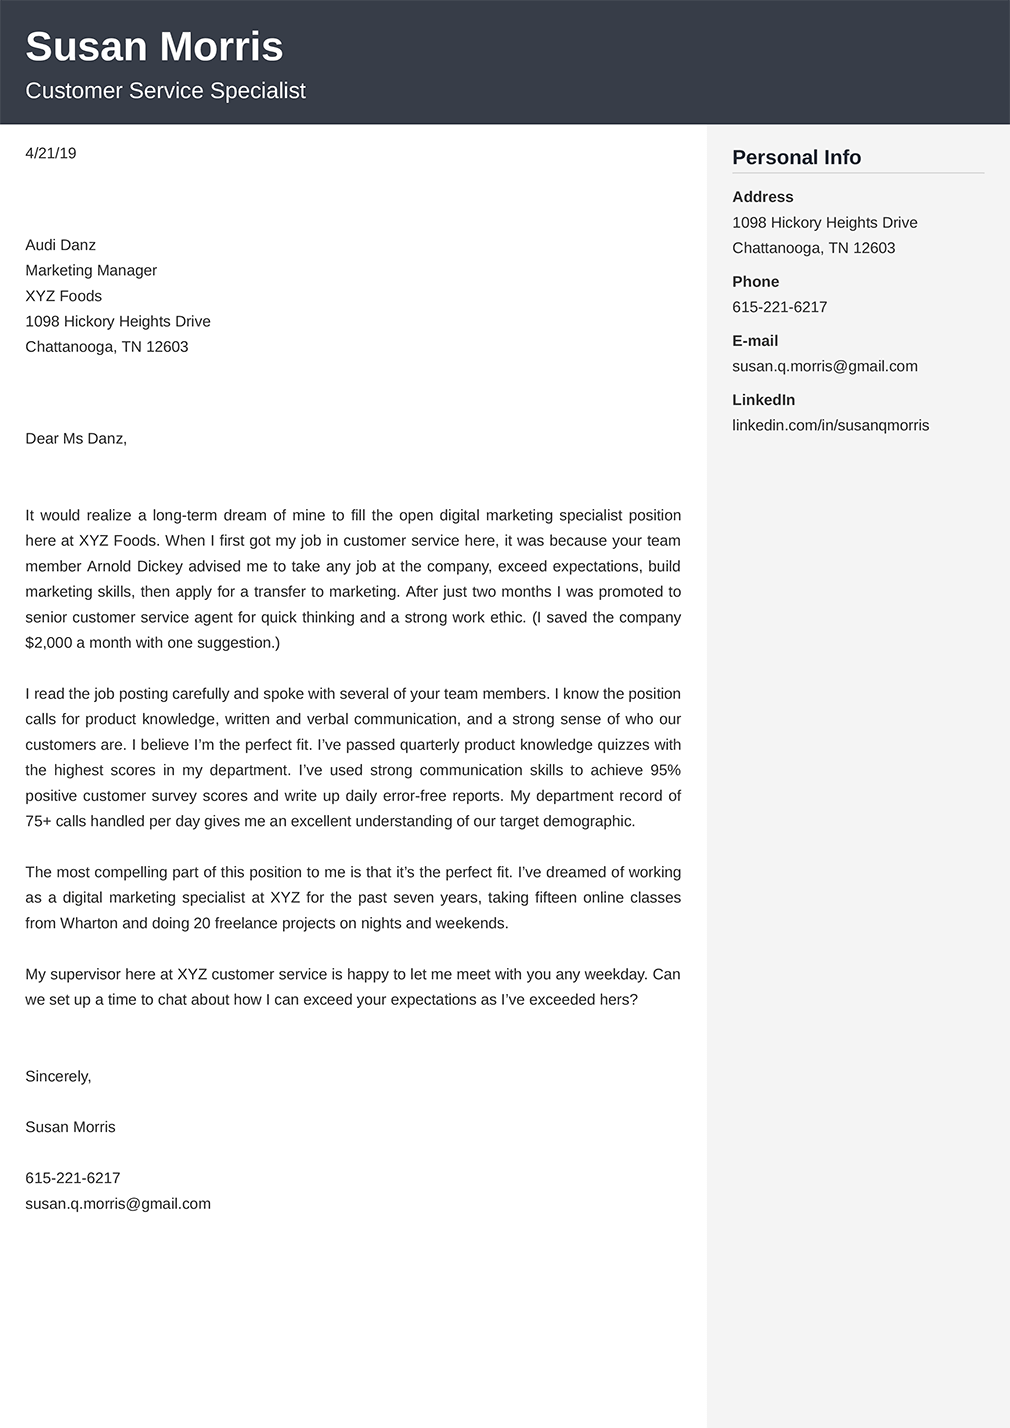 Application Letter For Job from cdn-images.zety.com